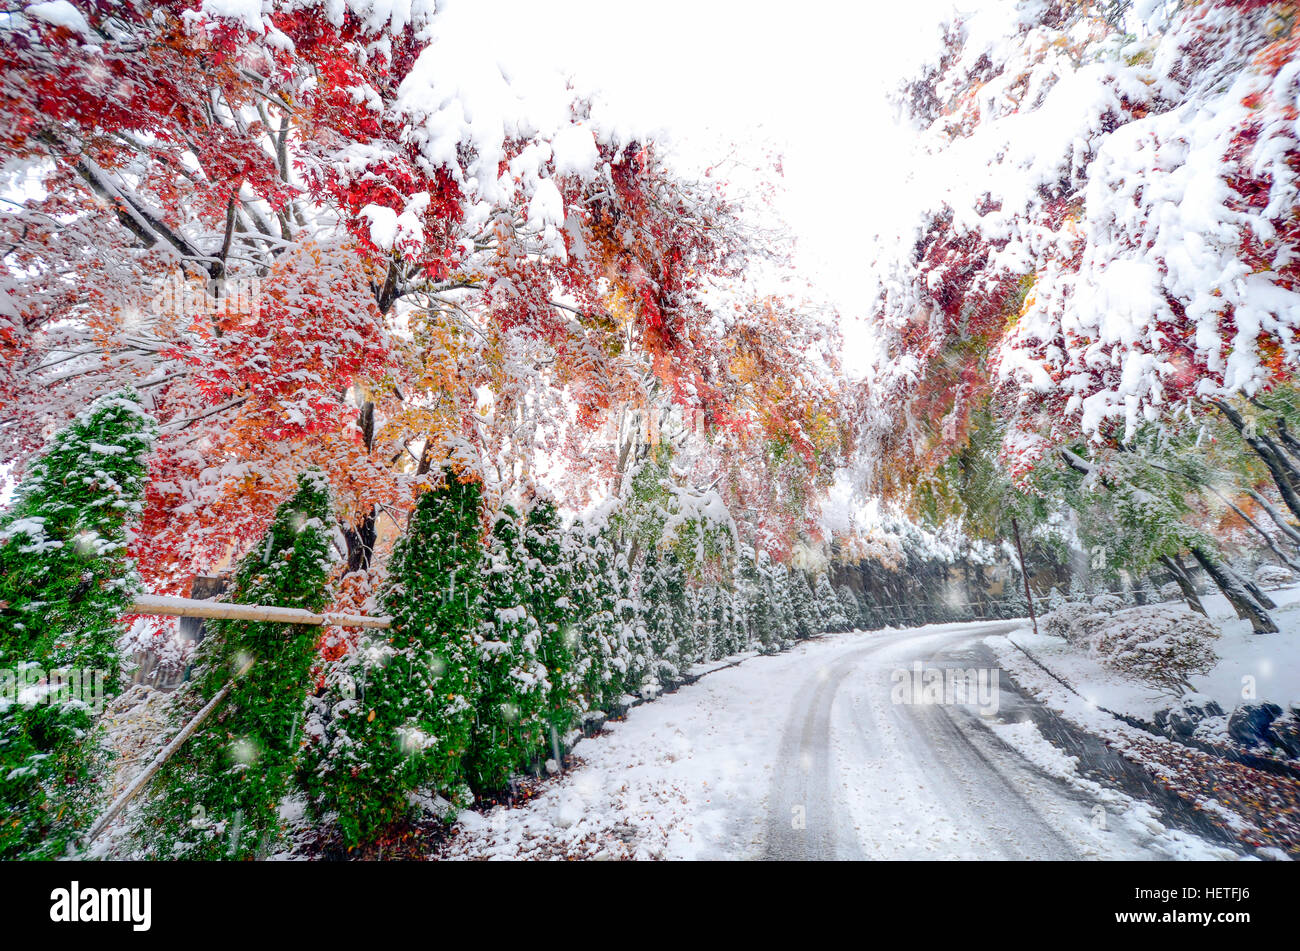 Blurred winter background with early snow and colourful autumn leaves. Stock Photo